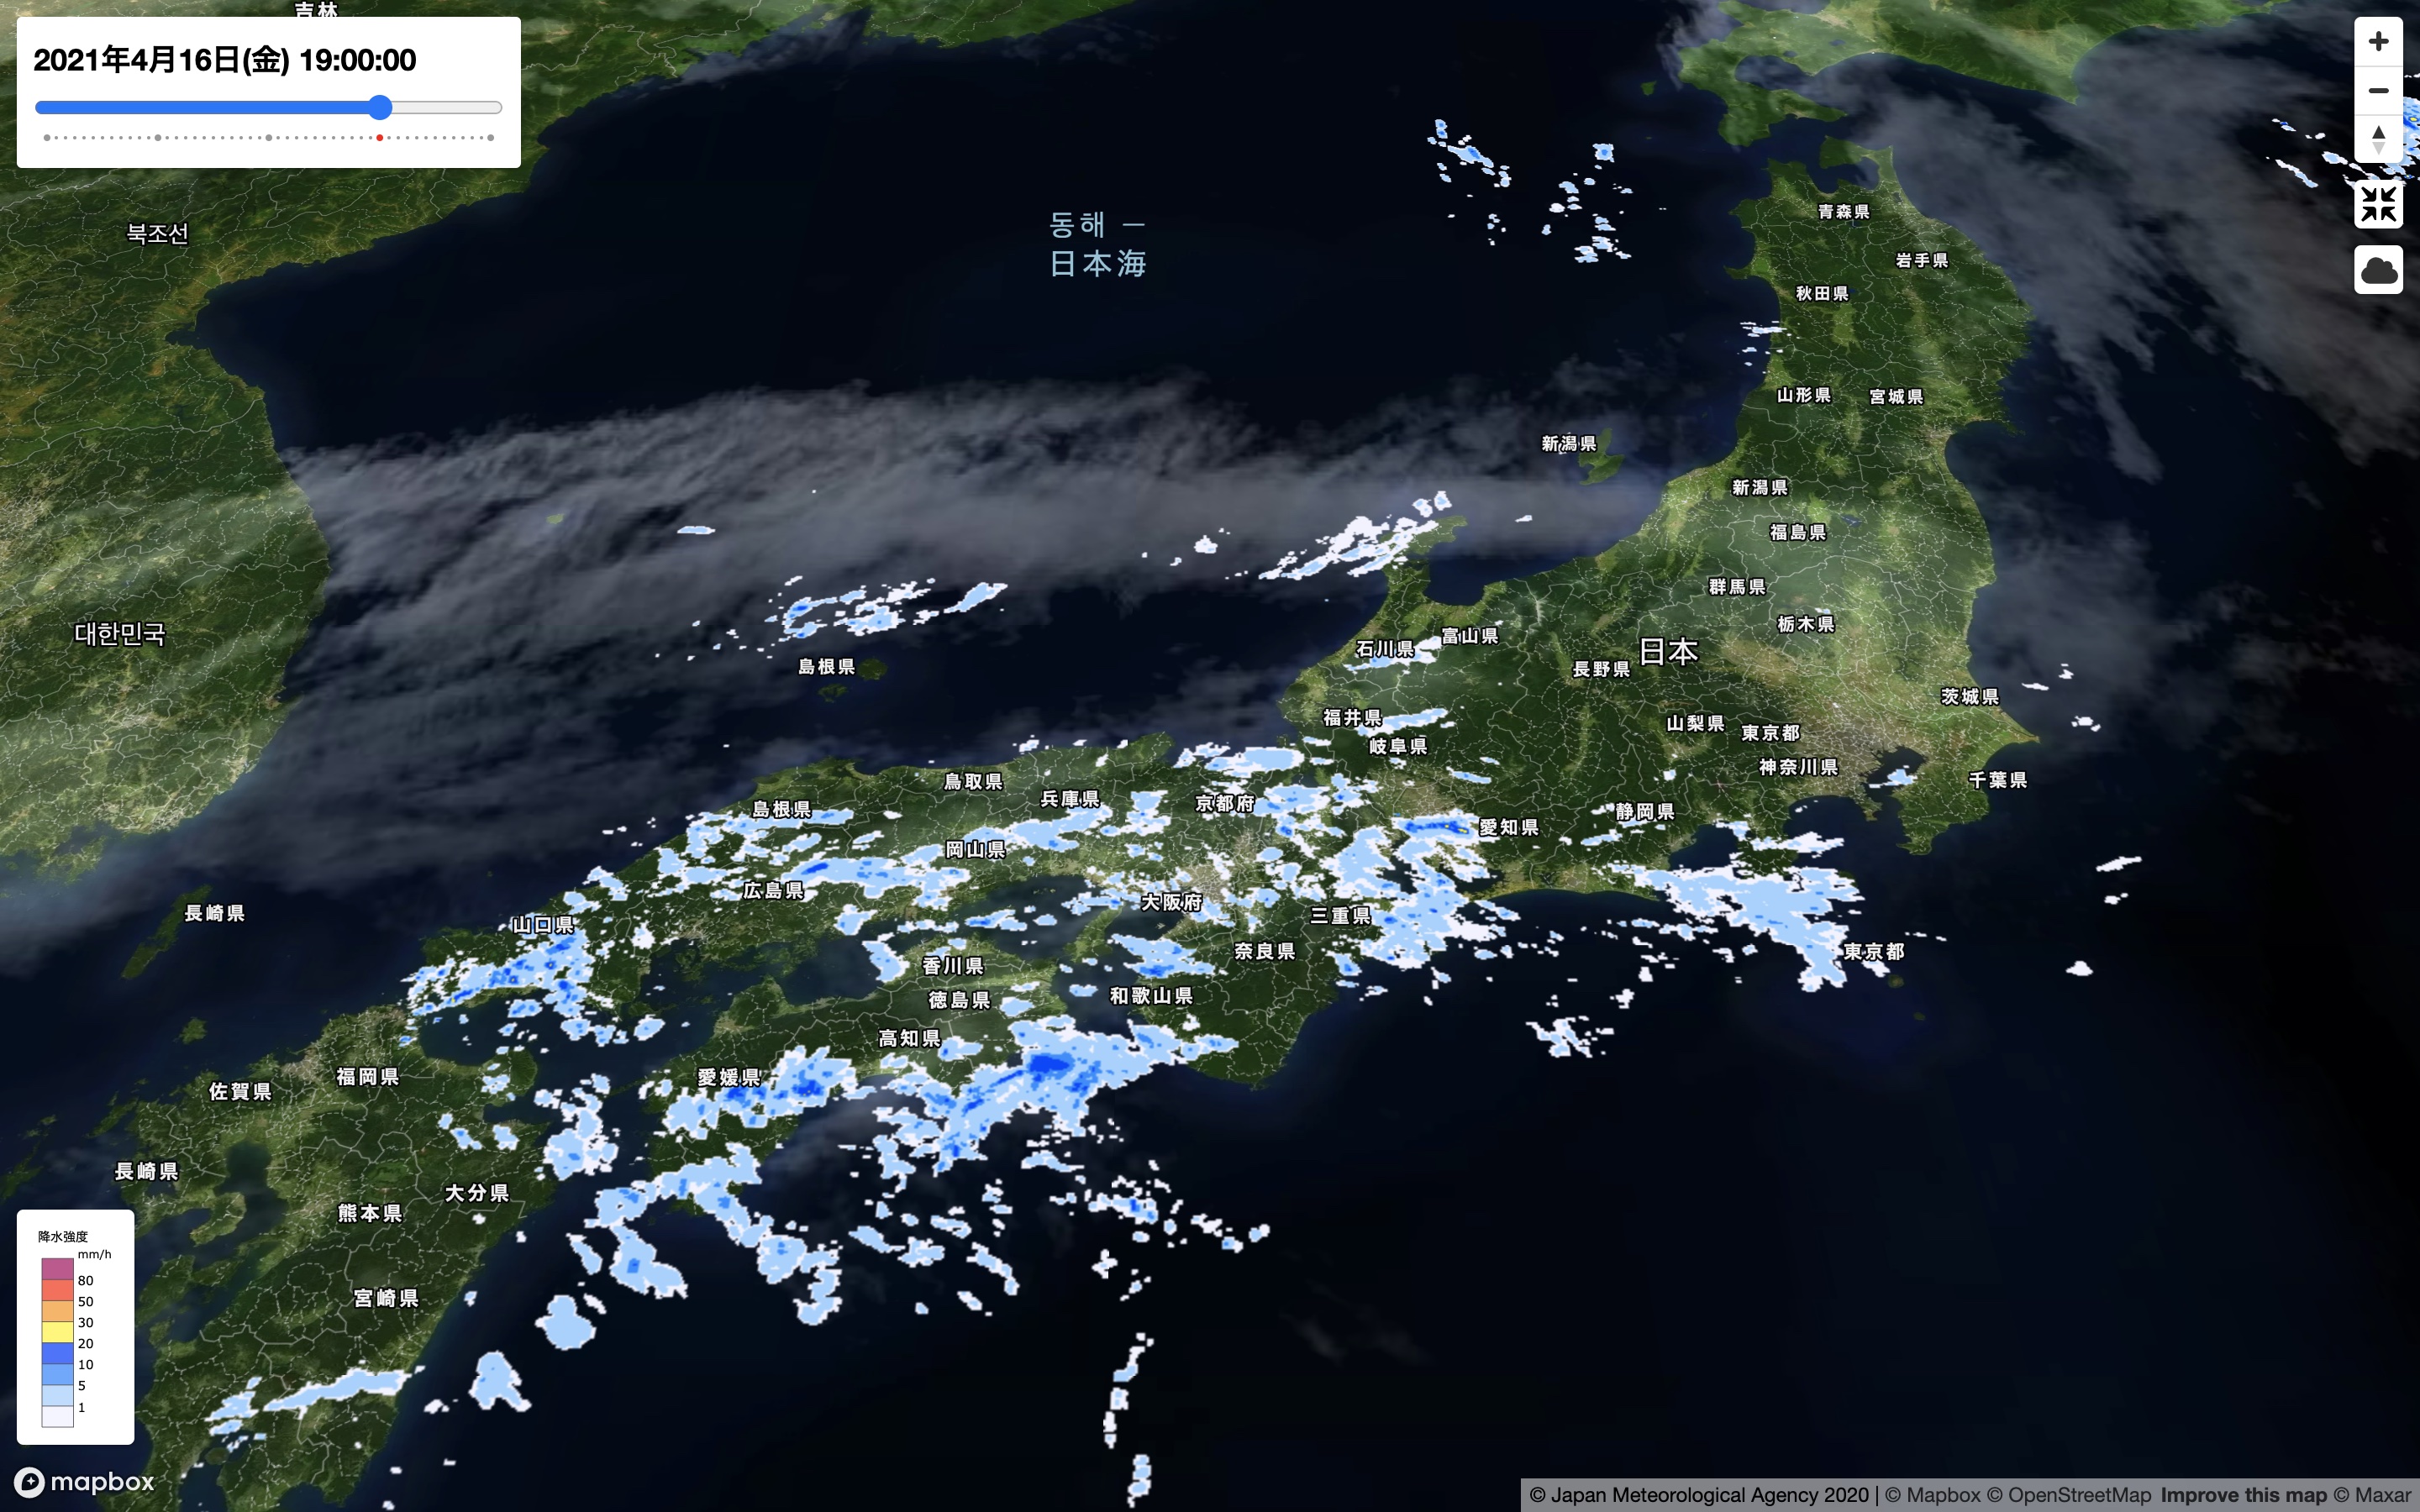 GitHub nagix/japanweather3d A realtime 3D weather map of Japan